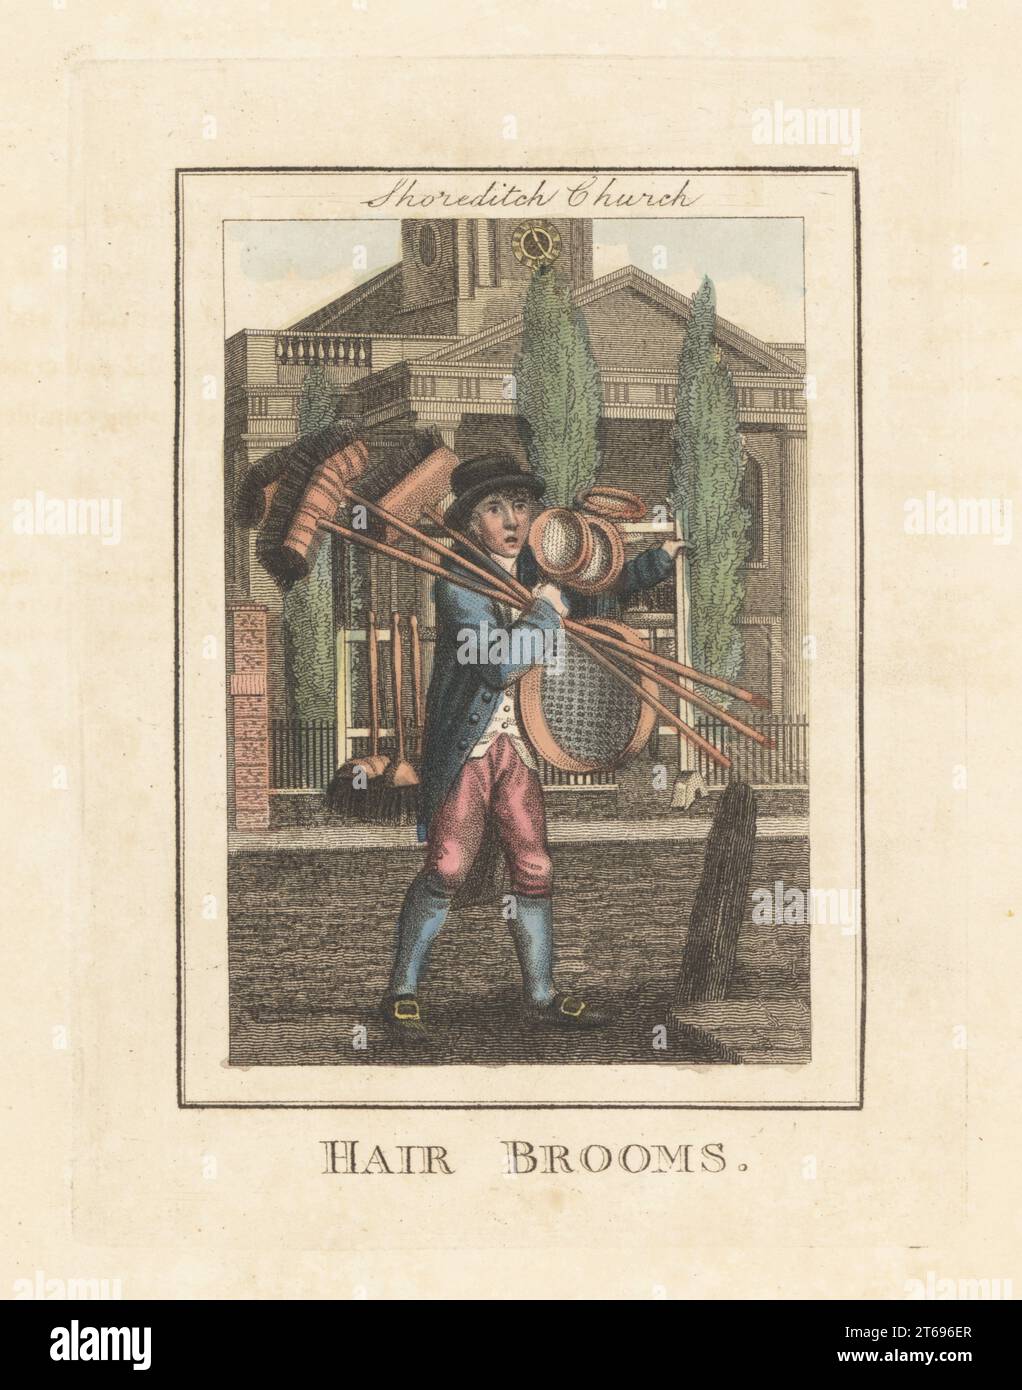 Broom seller in front of Shoreditch Church. In hat, coat, waistcoat and breeches, buckle shoes, with horse-hair brooms, brushes, wooden sieves and bowls. St Leonard's Church, Shoreditch, with its poplar trees. Handcoloured copperplate engraving by Edward Edwards after an illustration by William Marshall Craig from Description of the Plates Representing the Itinerant Traders of London, Richard Phillips, No. 71 St Pauls Churchyard, London, 1805. Stock Photo